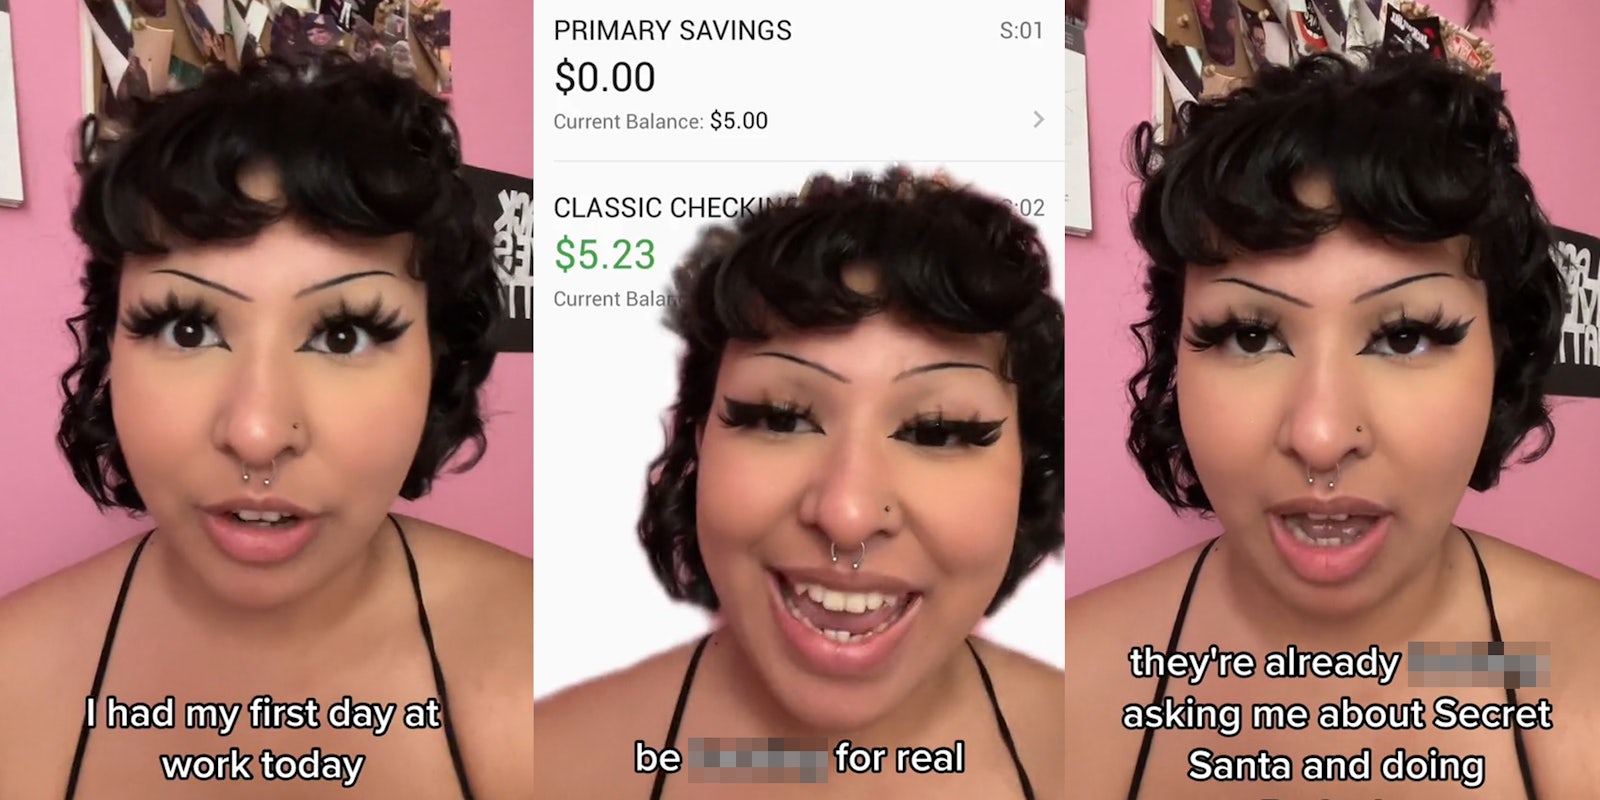 woman speaking caption 'I had my first day at work today' (l) woman greenscreen TikTok over checking account at $5.23 caption 'be blank for real' (c) woman speaking caption 'they're already blank asking me about Secret Santa and doing a potluck' (r)